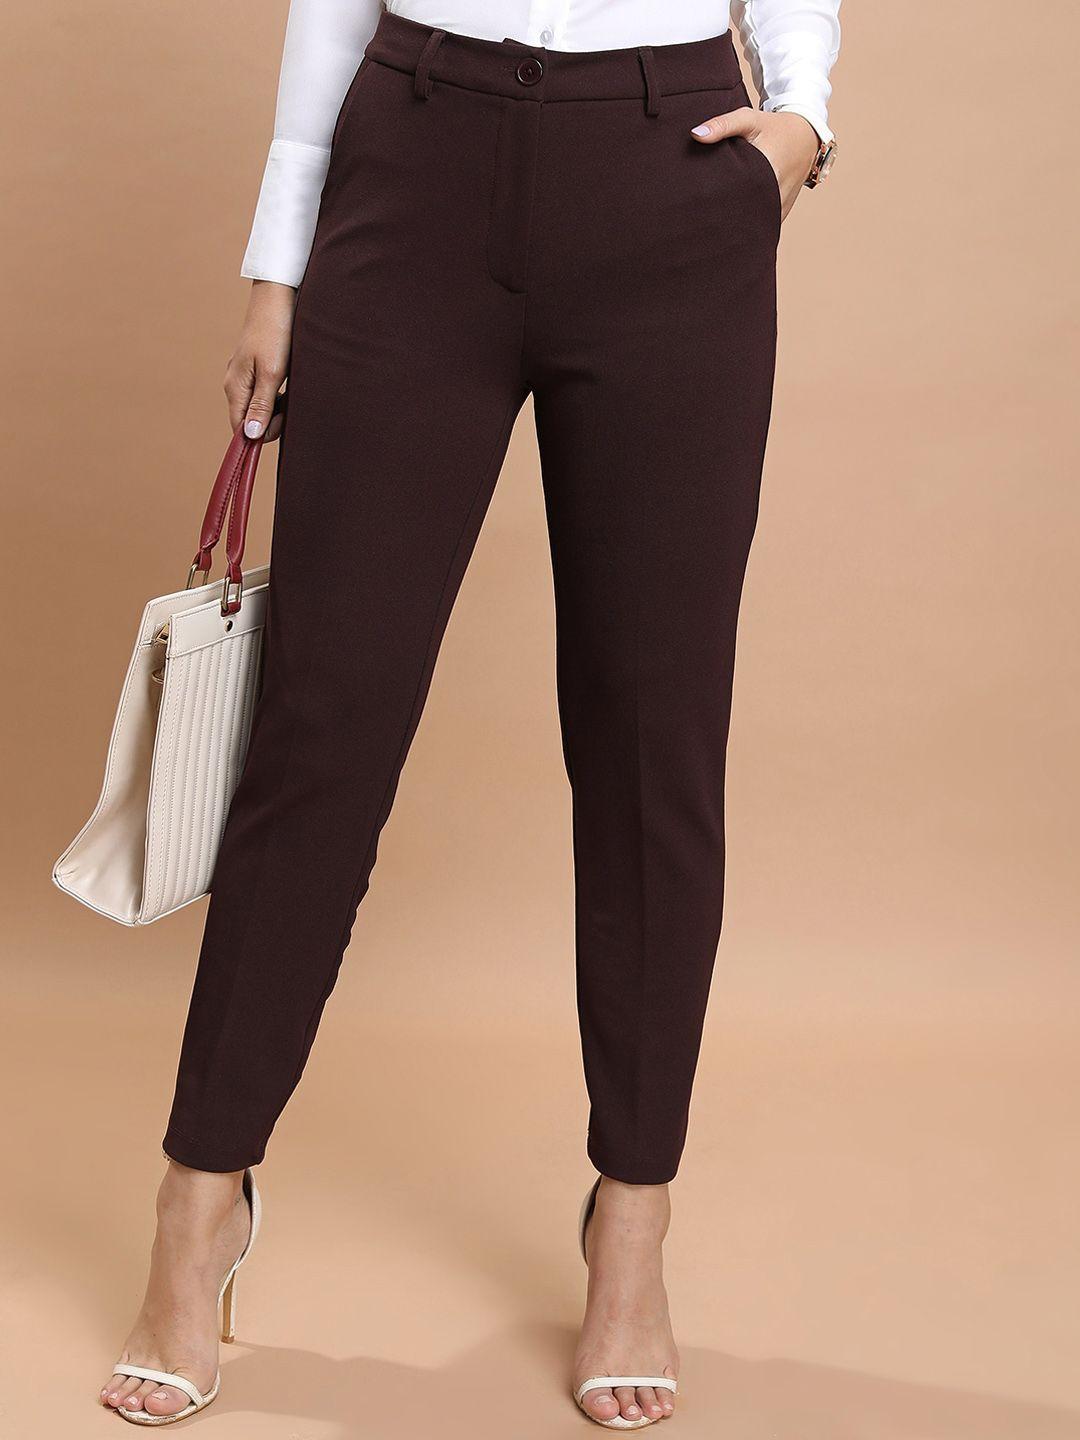 tokyo-talkies-women-mid-rise-flat-front-regular-fit-casual-trousers